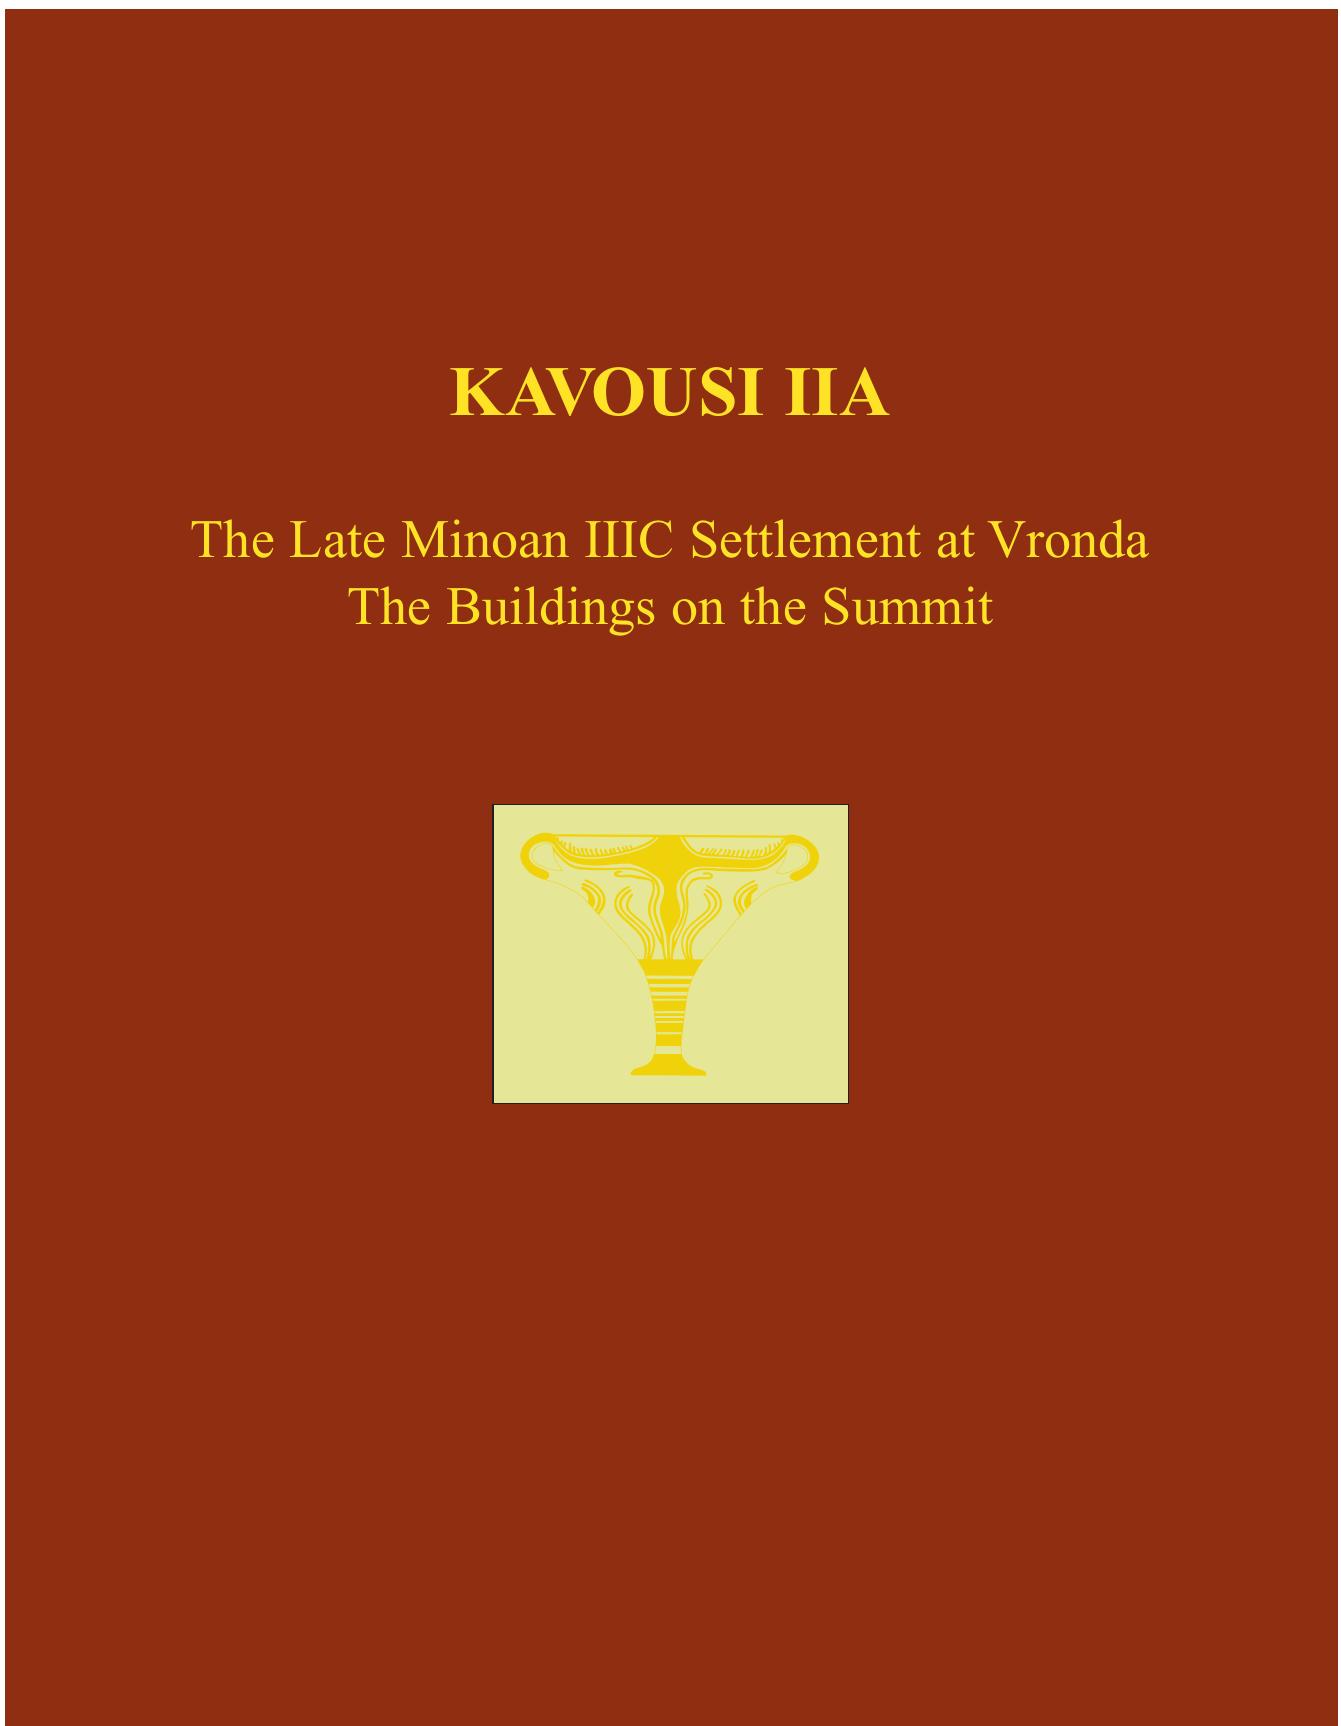 Kavousi IIA: The Late Minoan IIIC Settlement at Vronda. The Buildings on the Summit (Prehistory Monographs) by Leslie Preston Day Nancy L. Klein Lee Ann Turner